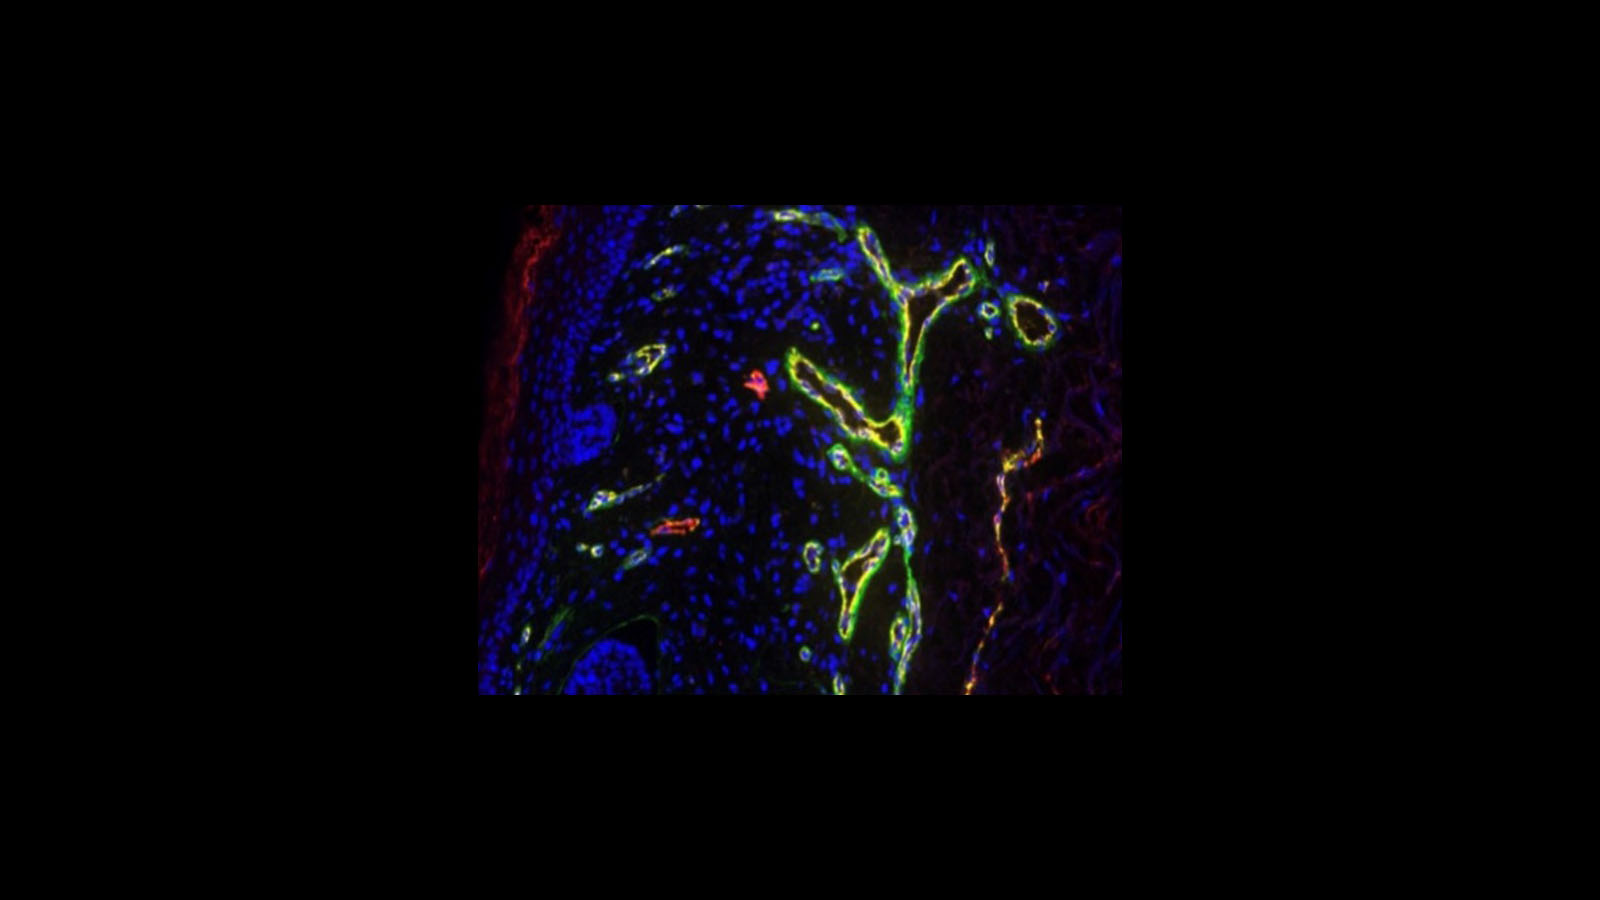 Cell DIVE multiplexed immunofluorescent image of skin courtesy of Dr. Fiona Ginty, Chrystal Chadwick, and Liz McDonough at GE Research